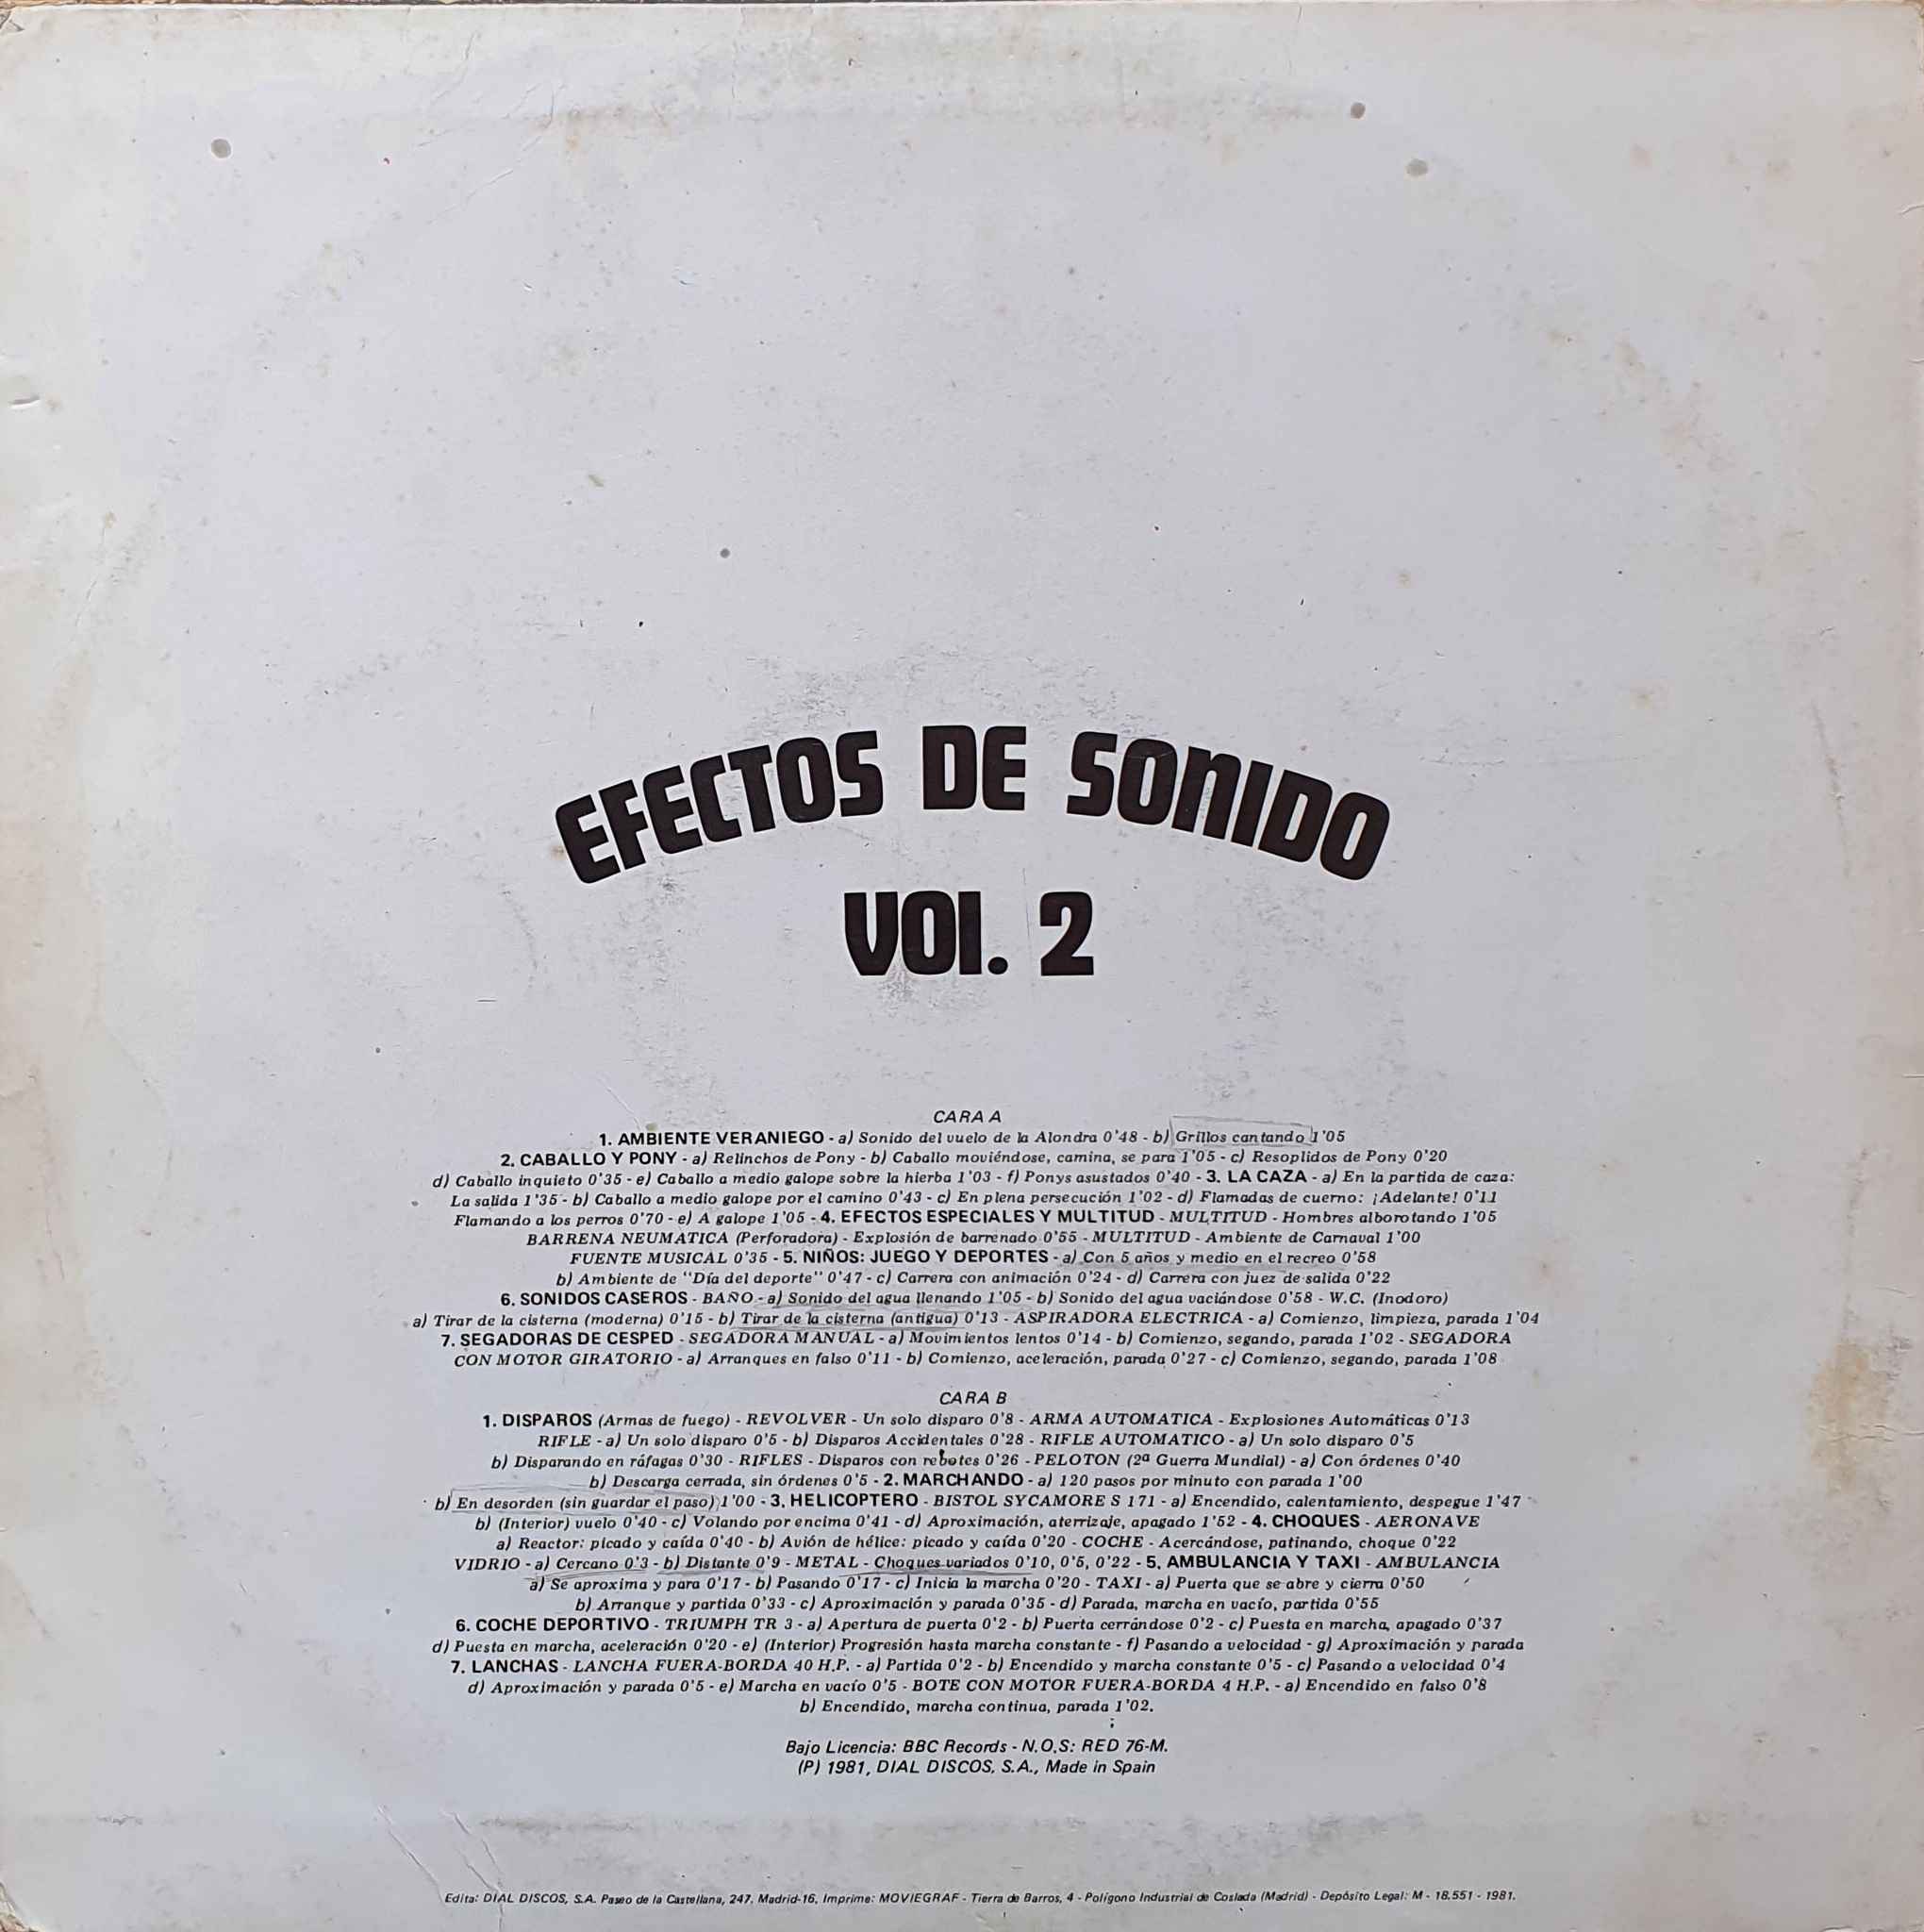 Picture of 51.0106 Efectos de sonido No 2 by artist Various from the BBC records and Tapes library